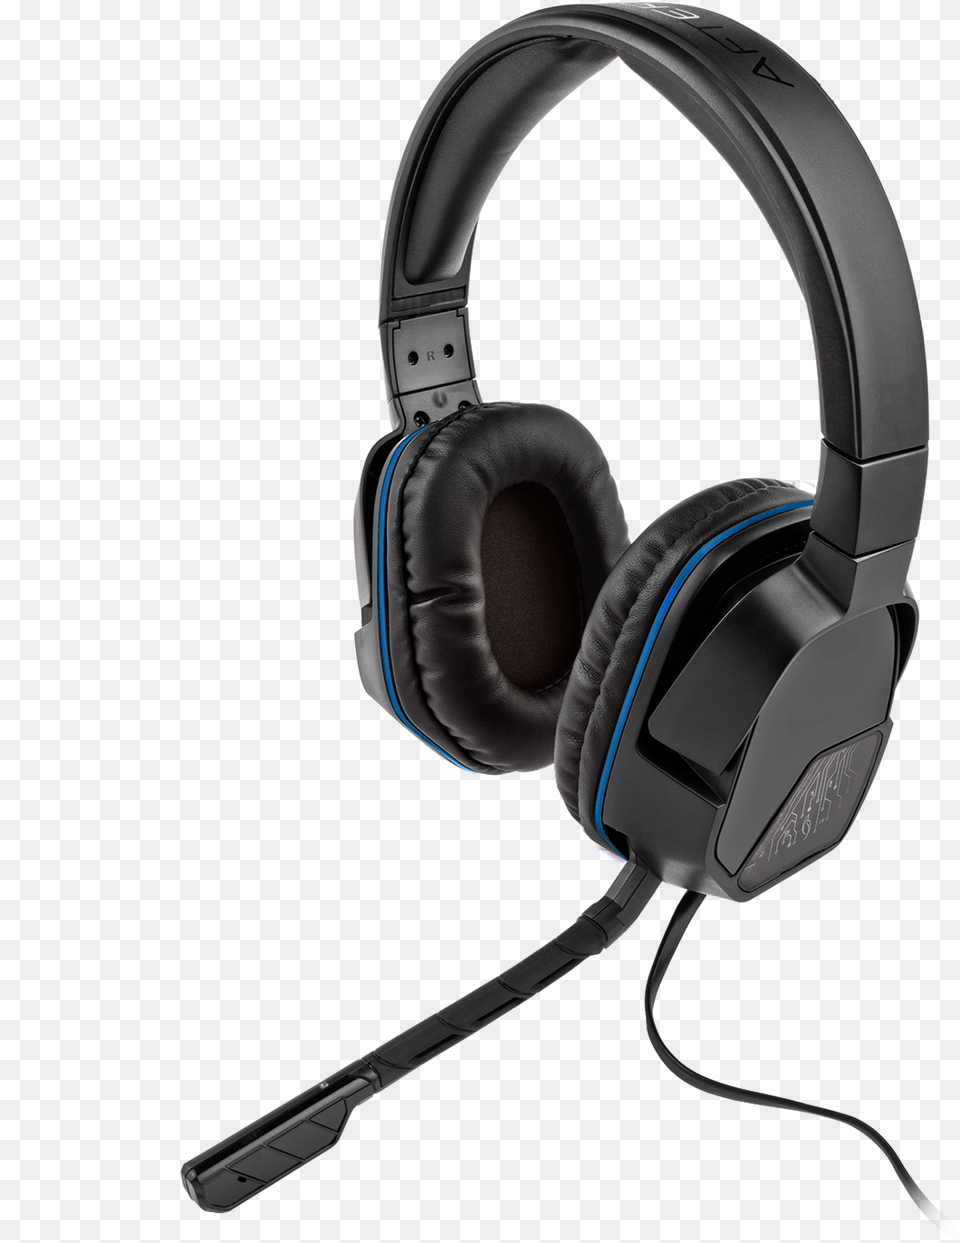 Pdp Afterglow Ps4 Lvl 3 Stereo Gaming Headset Black Afterglow Lvl 3 Xbox Headset, Electronics, Headphones Free Png Download